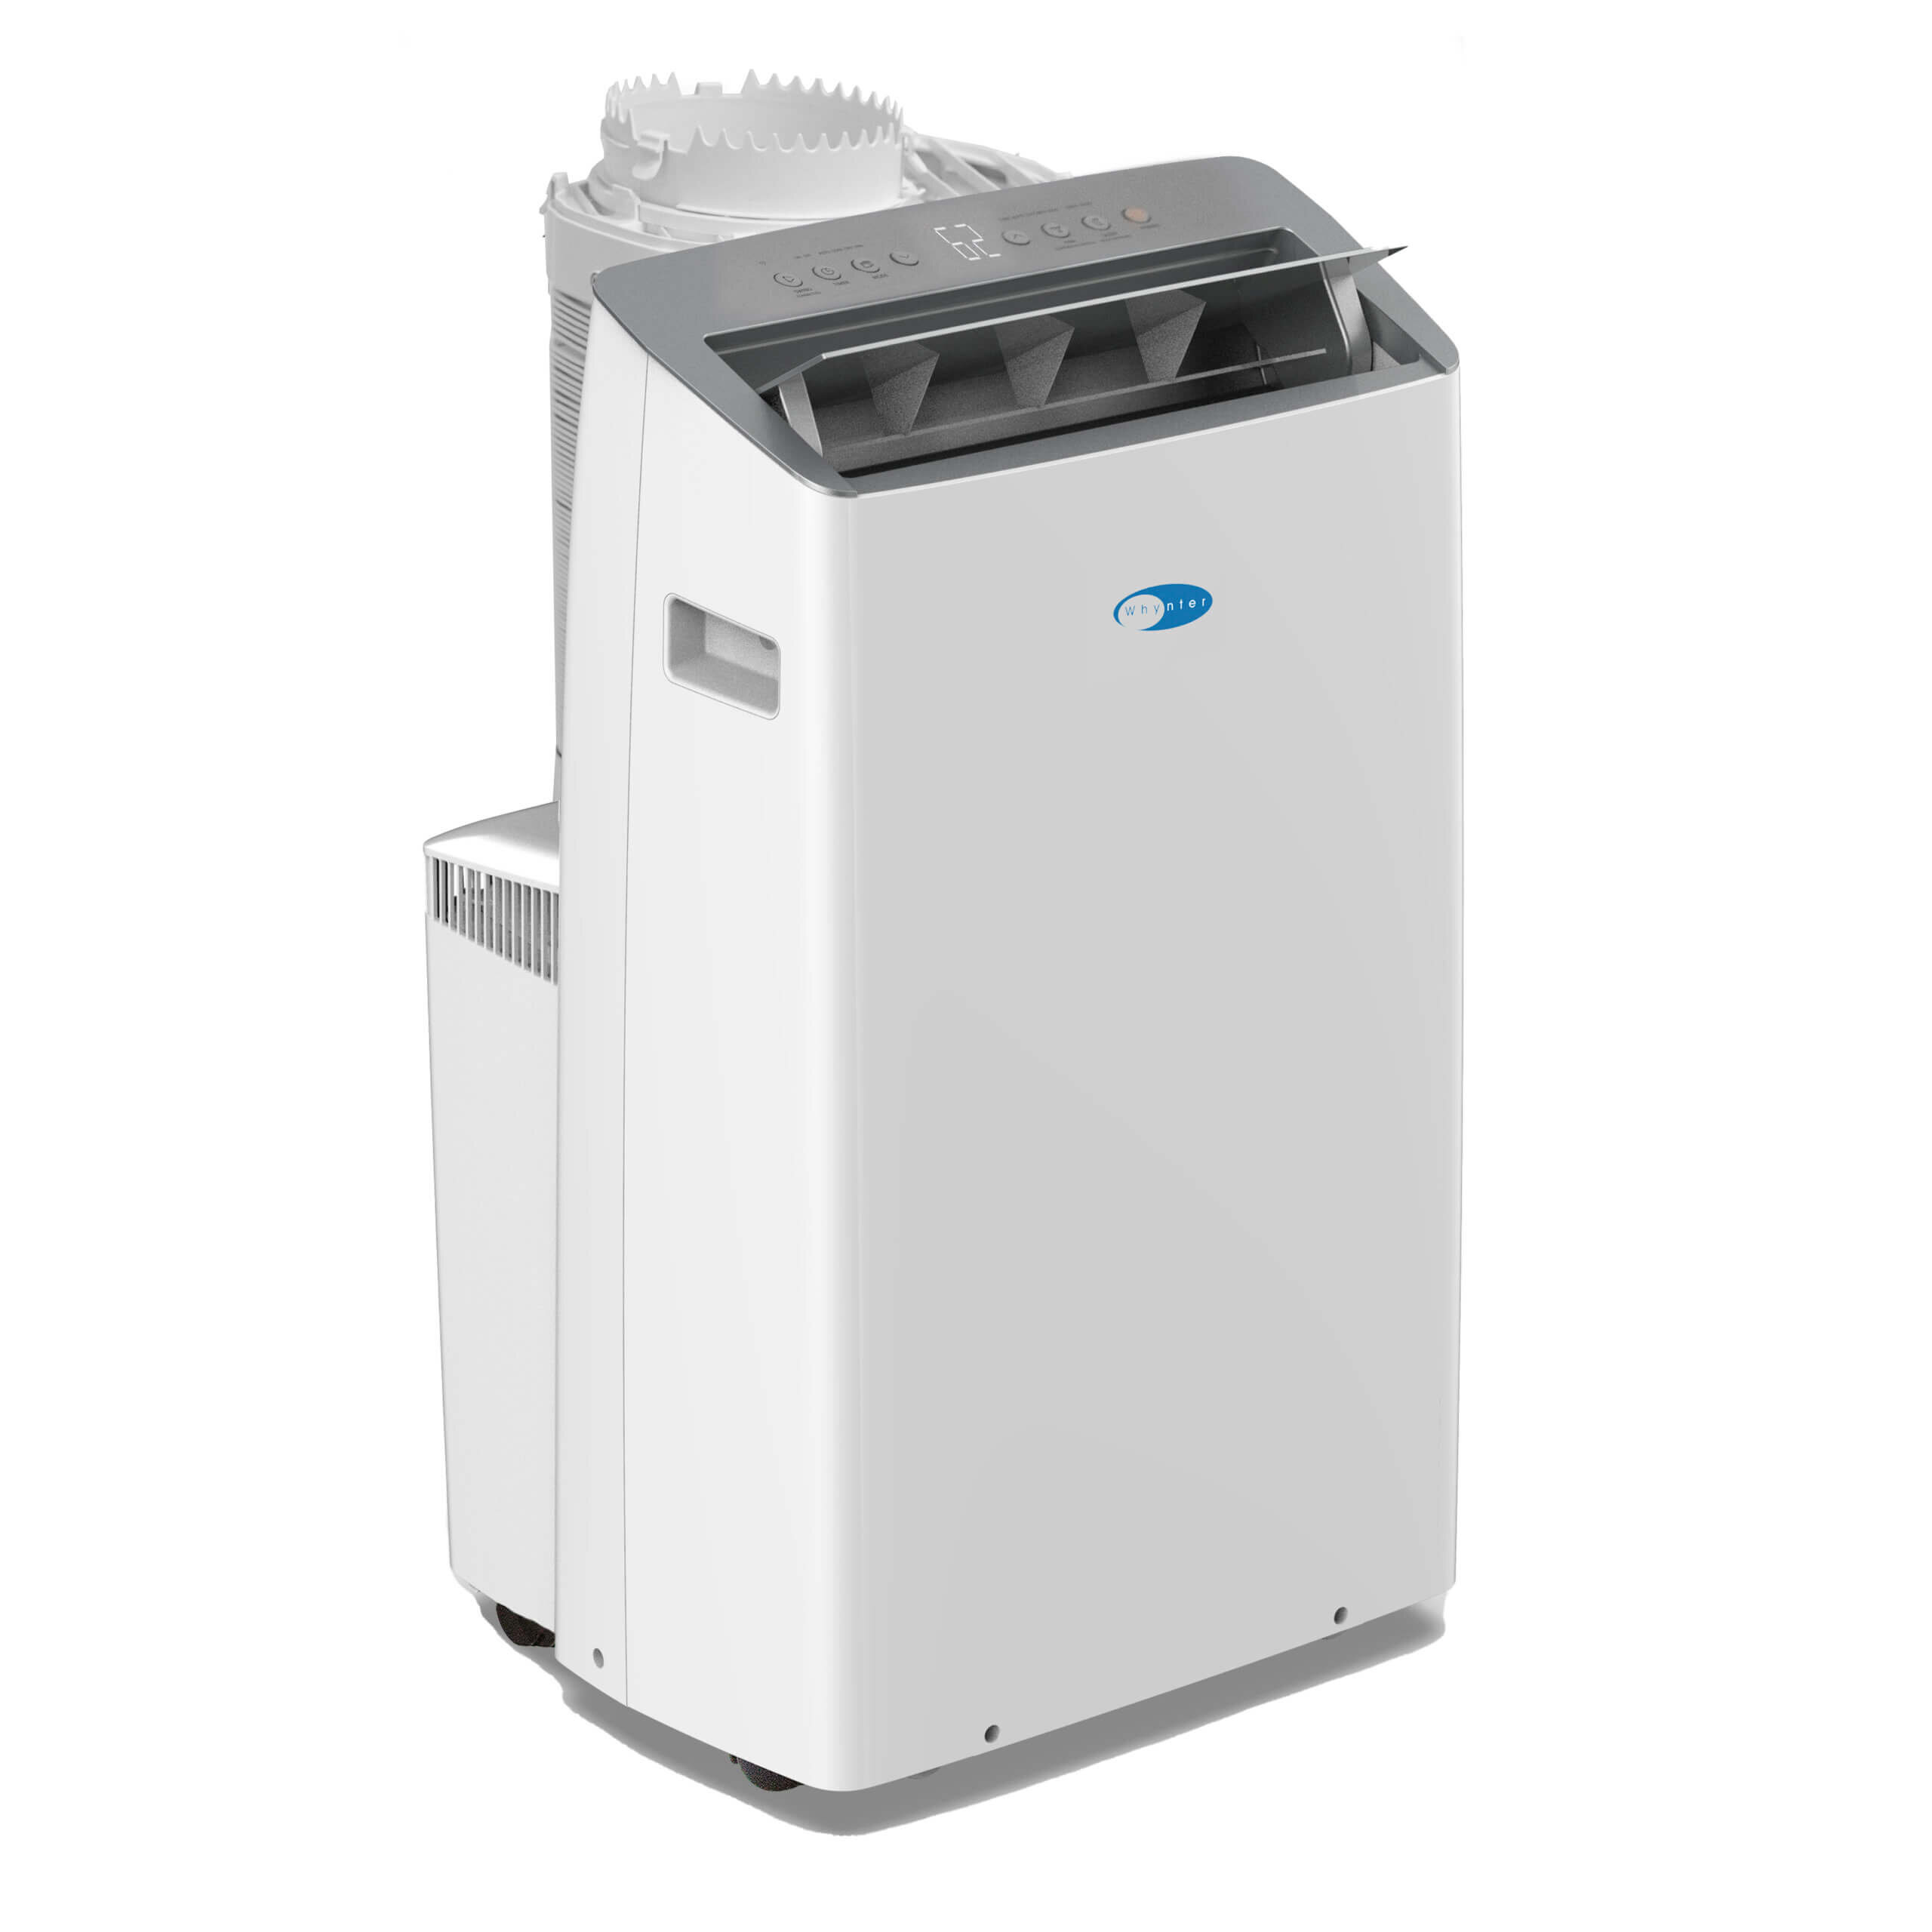 Whynter Portable Air Conditioner Says Stop 